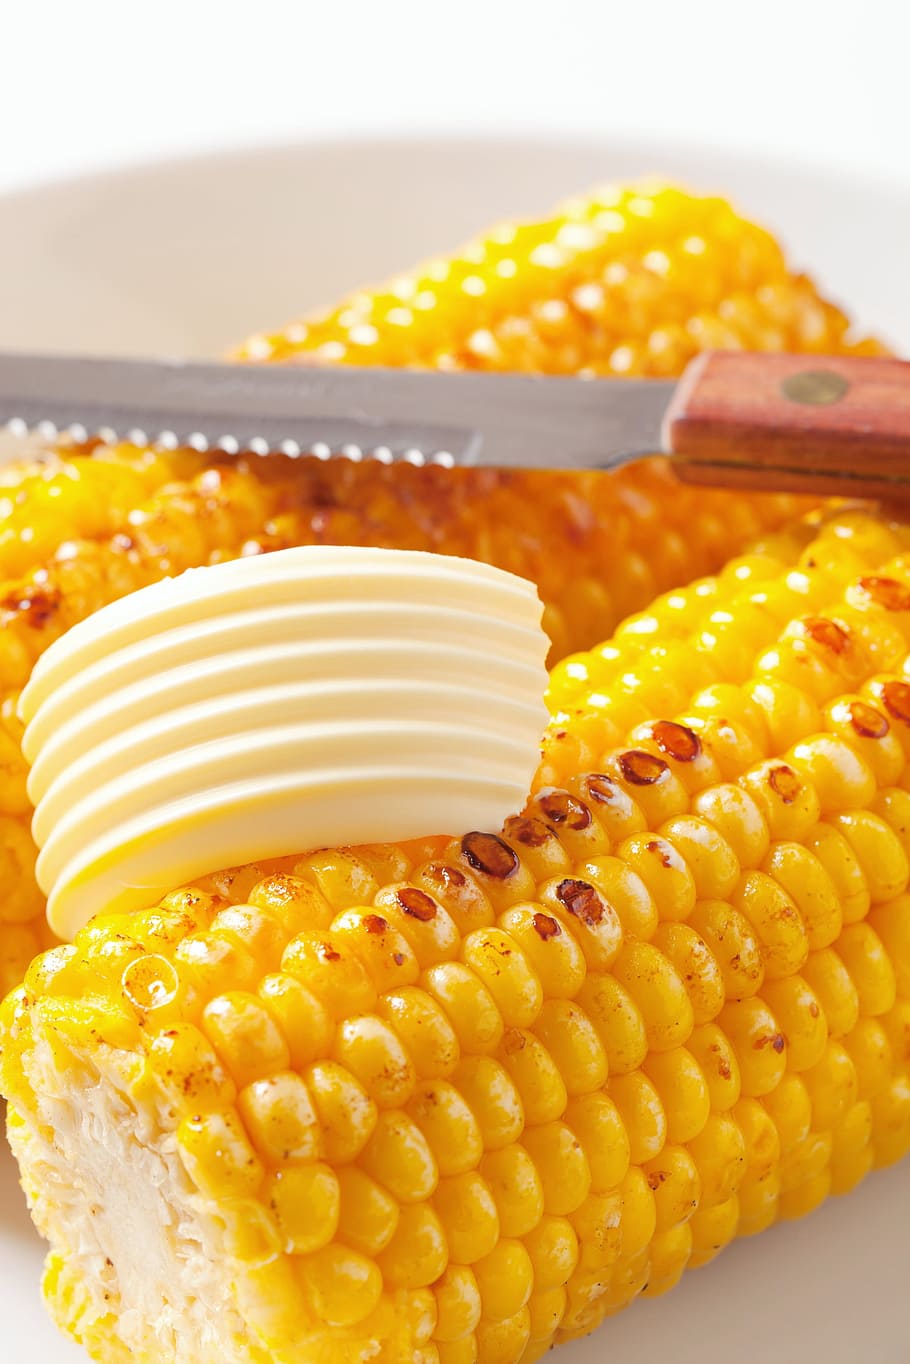 corn, coarse cereals, grains, food, food and drink, still life, freshness, sweetcorn, close-up, sweet food